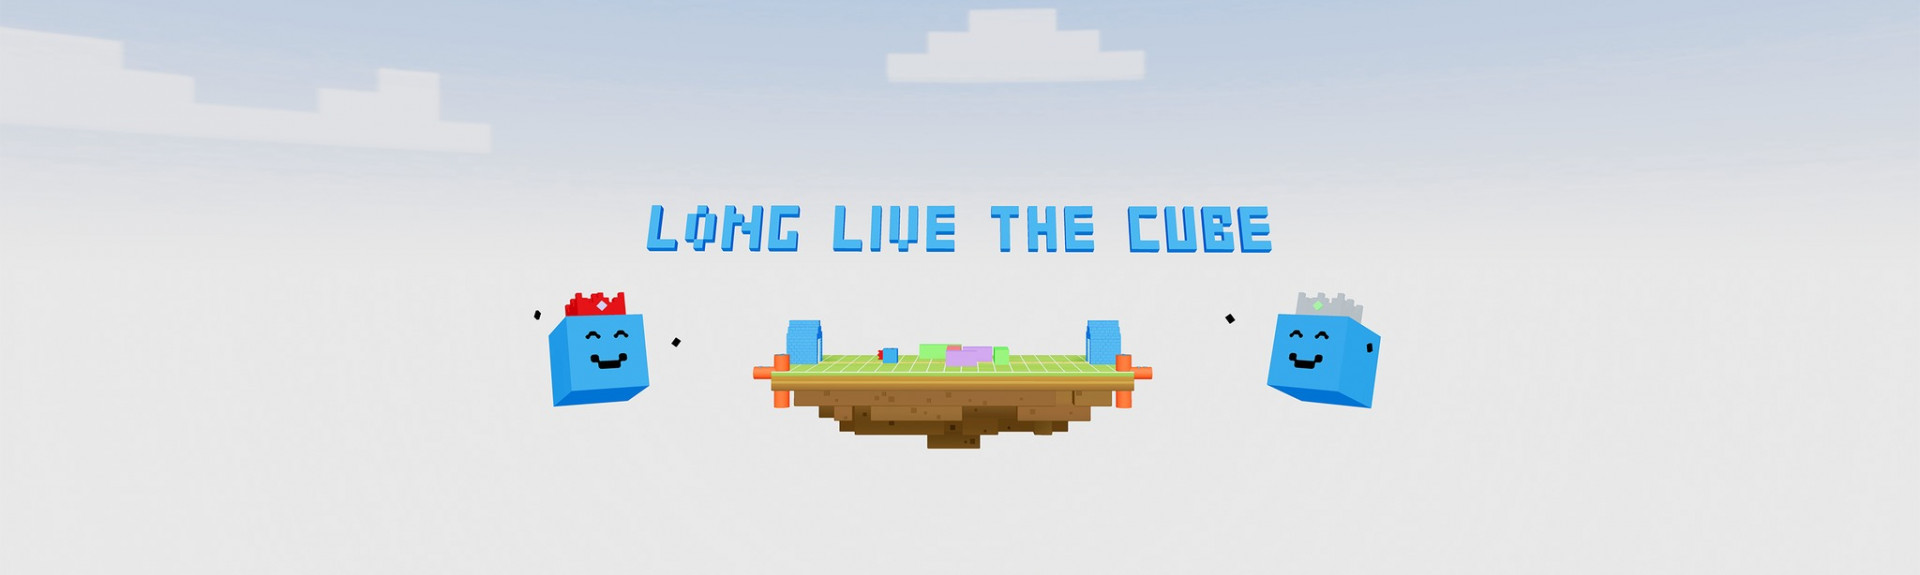 Long Live The Cube